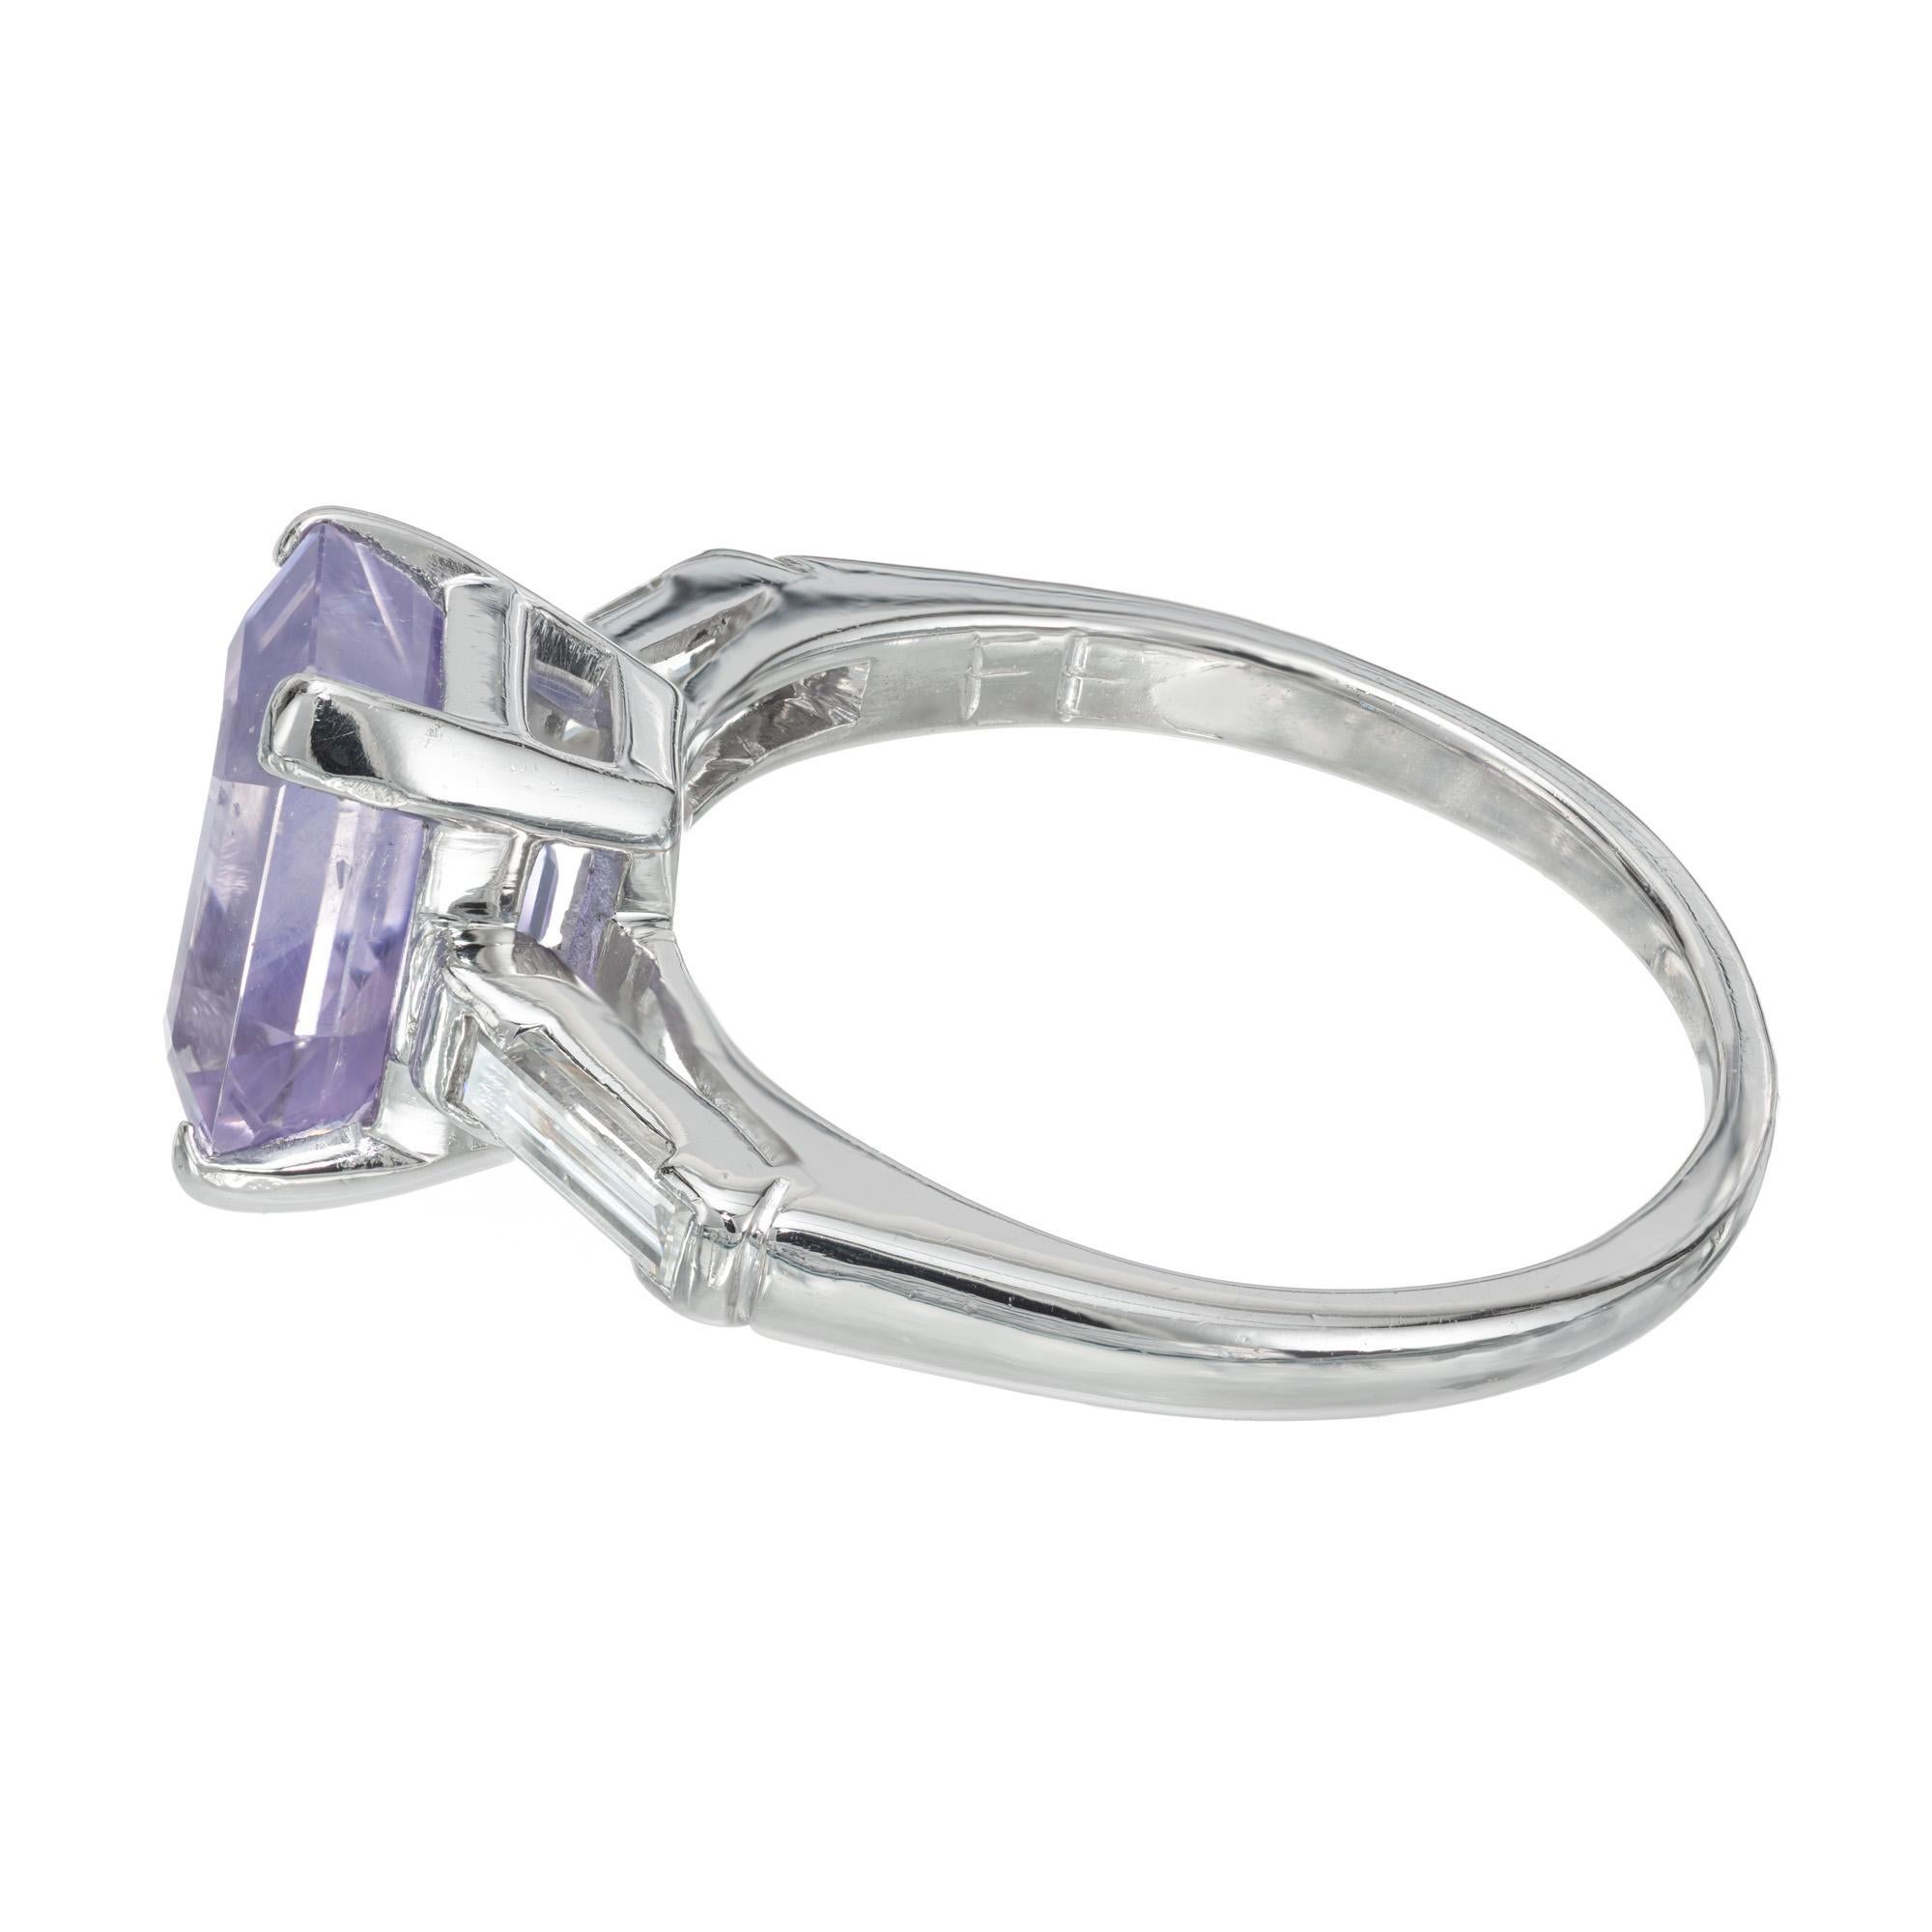 GIA 2.71 Carat Violet Sapphire Diamond Platinum Art Deco Engagement Ring In Good Condition For Sale In Stamford, CT